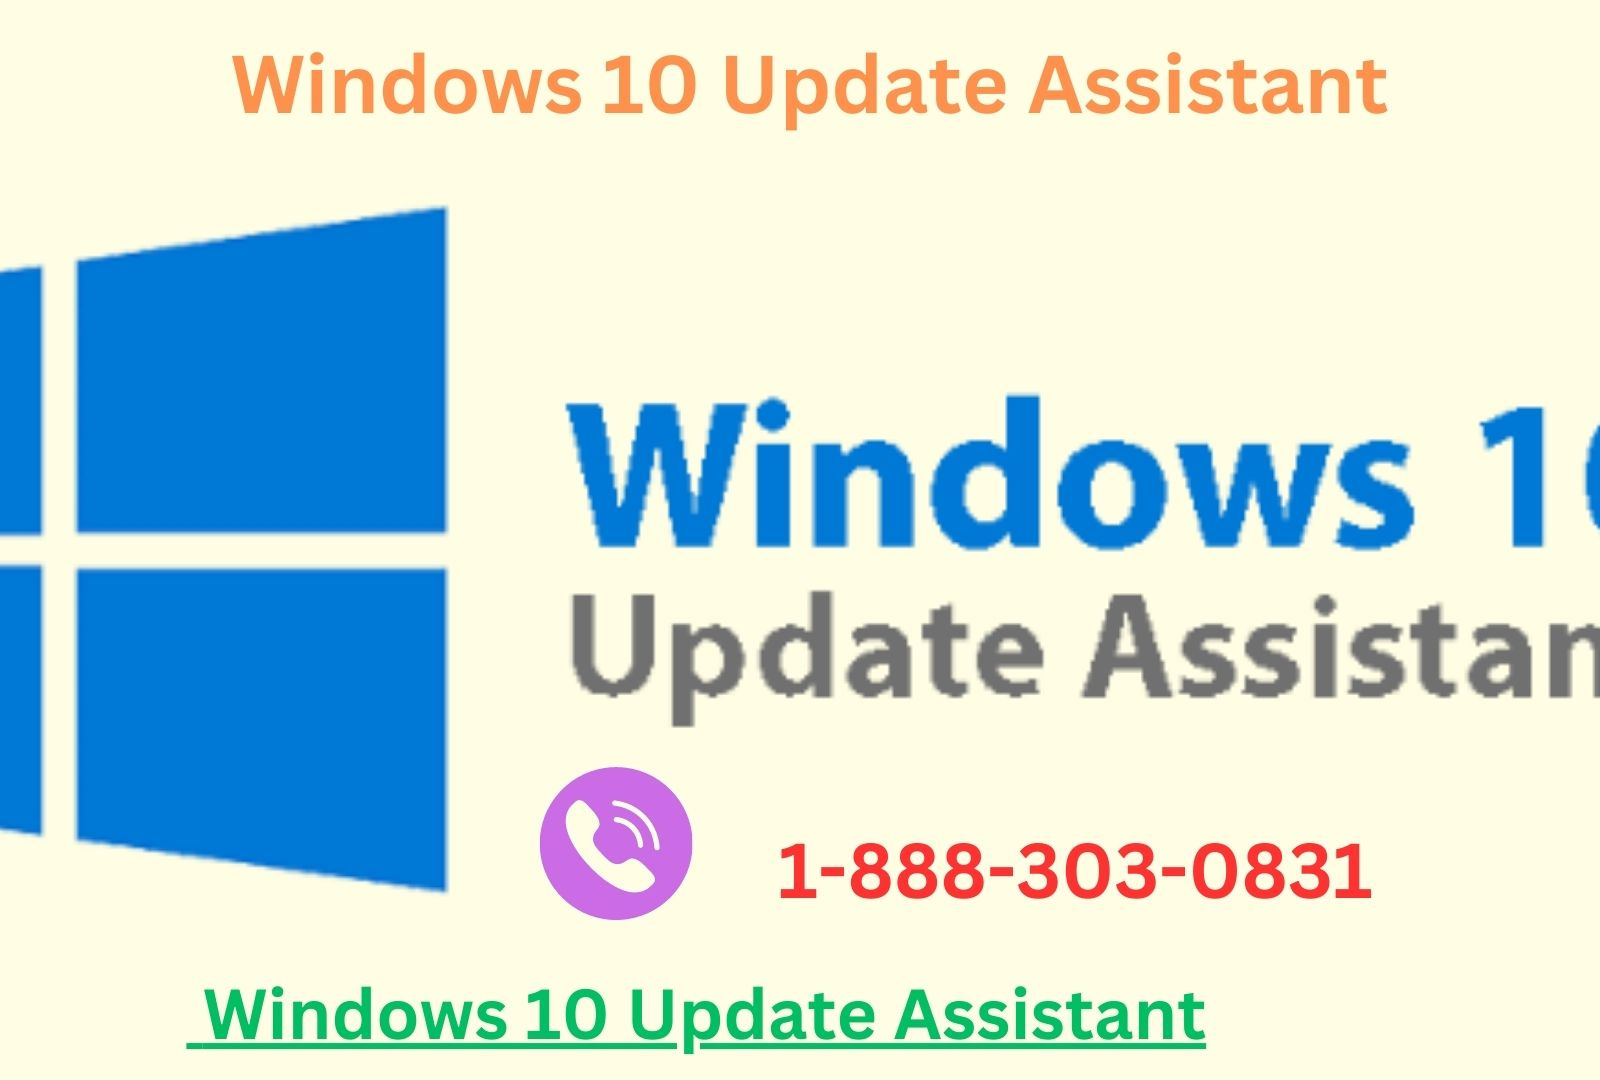 Windows 10 update Assistant by Ronaldo Kevin on Dribbble